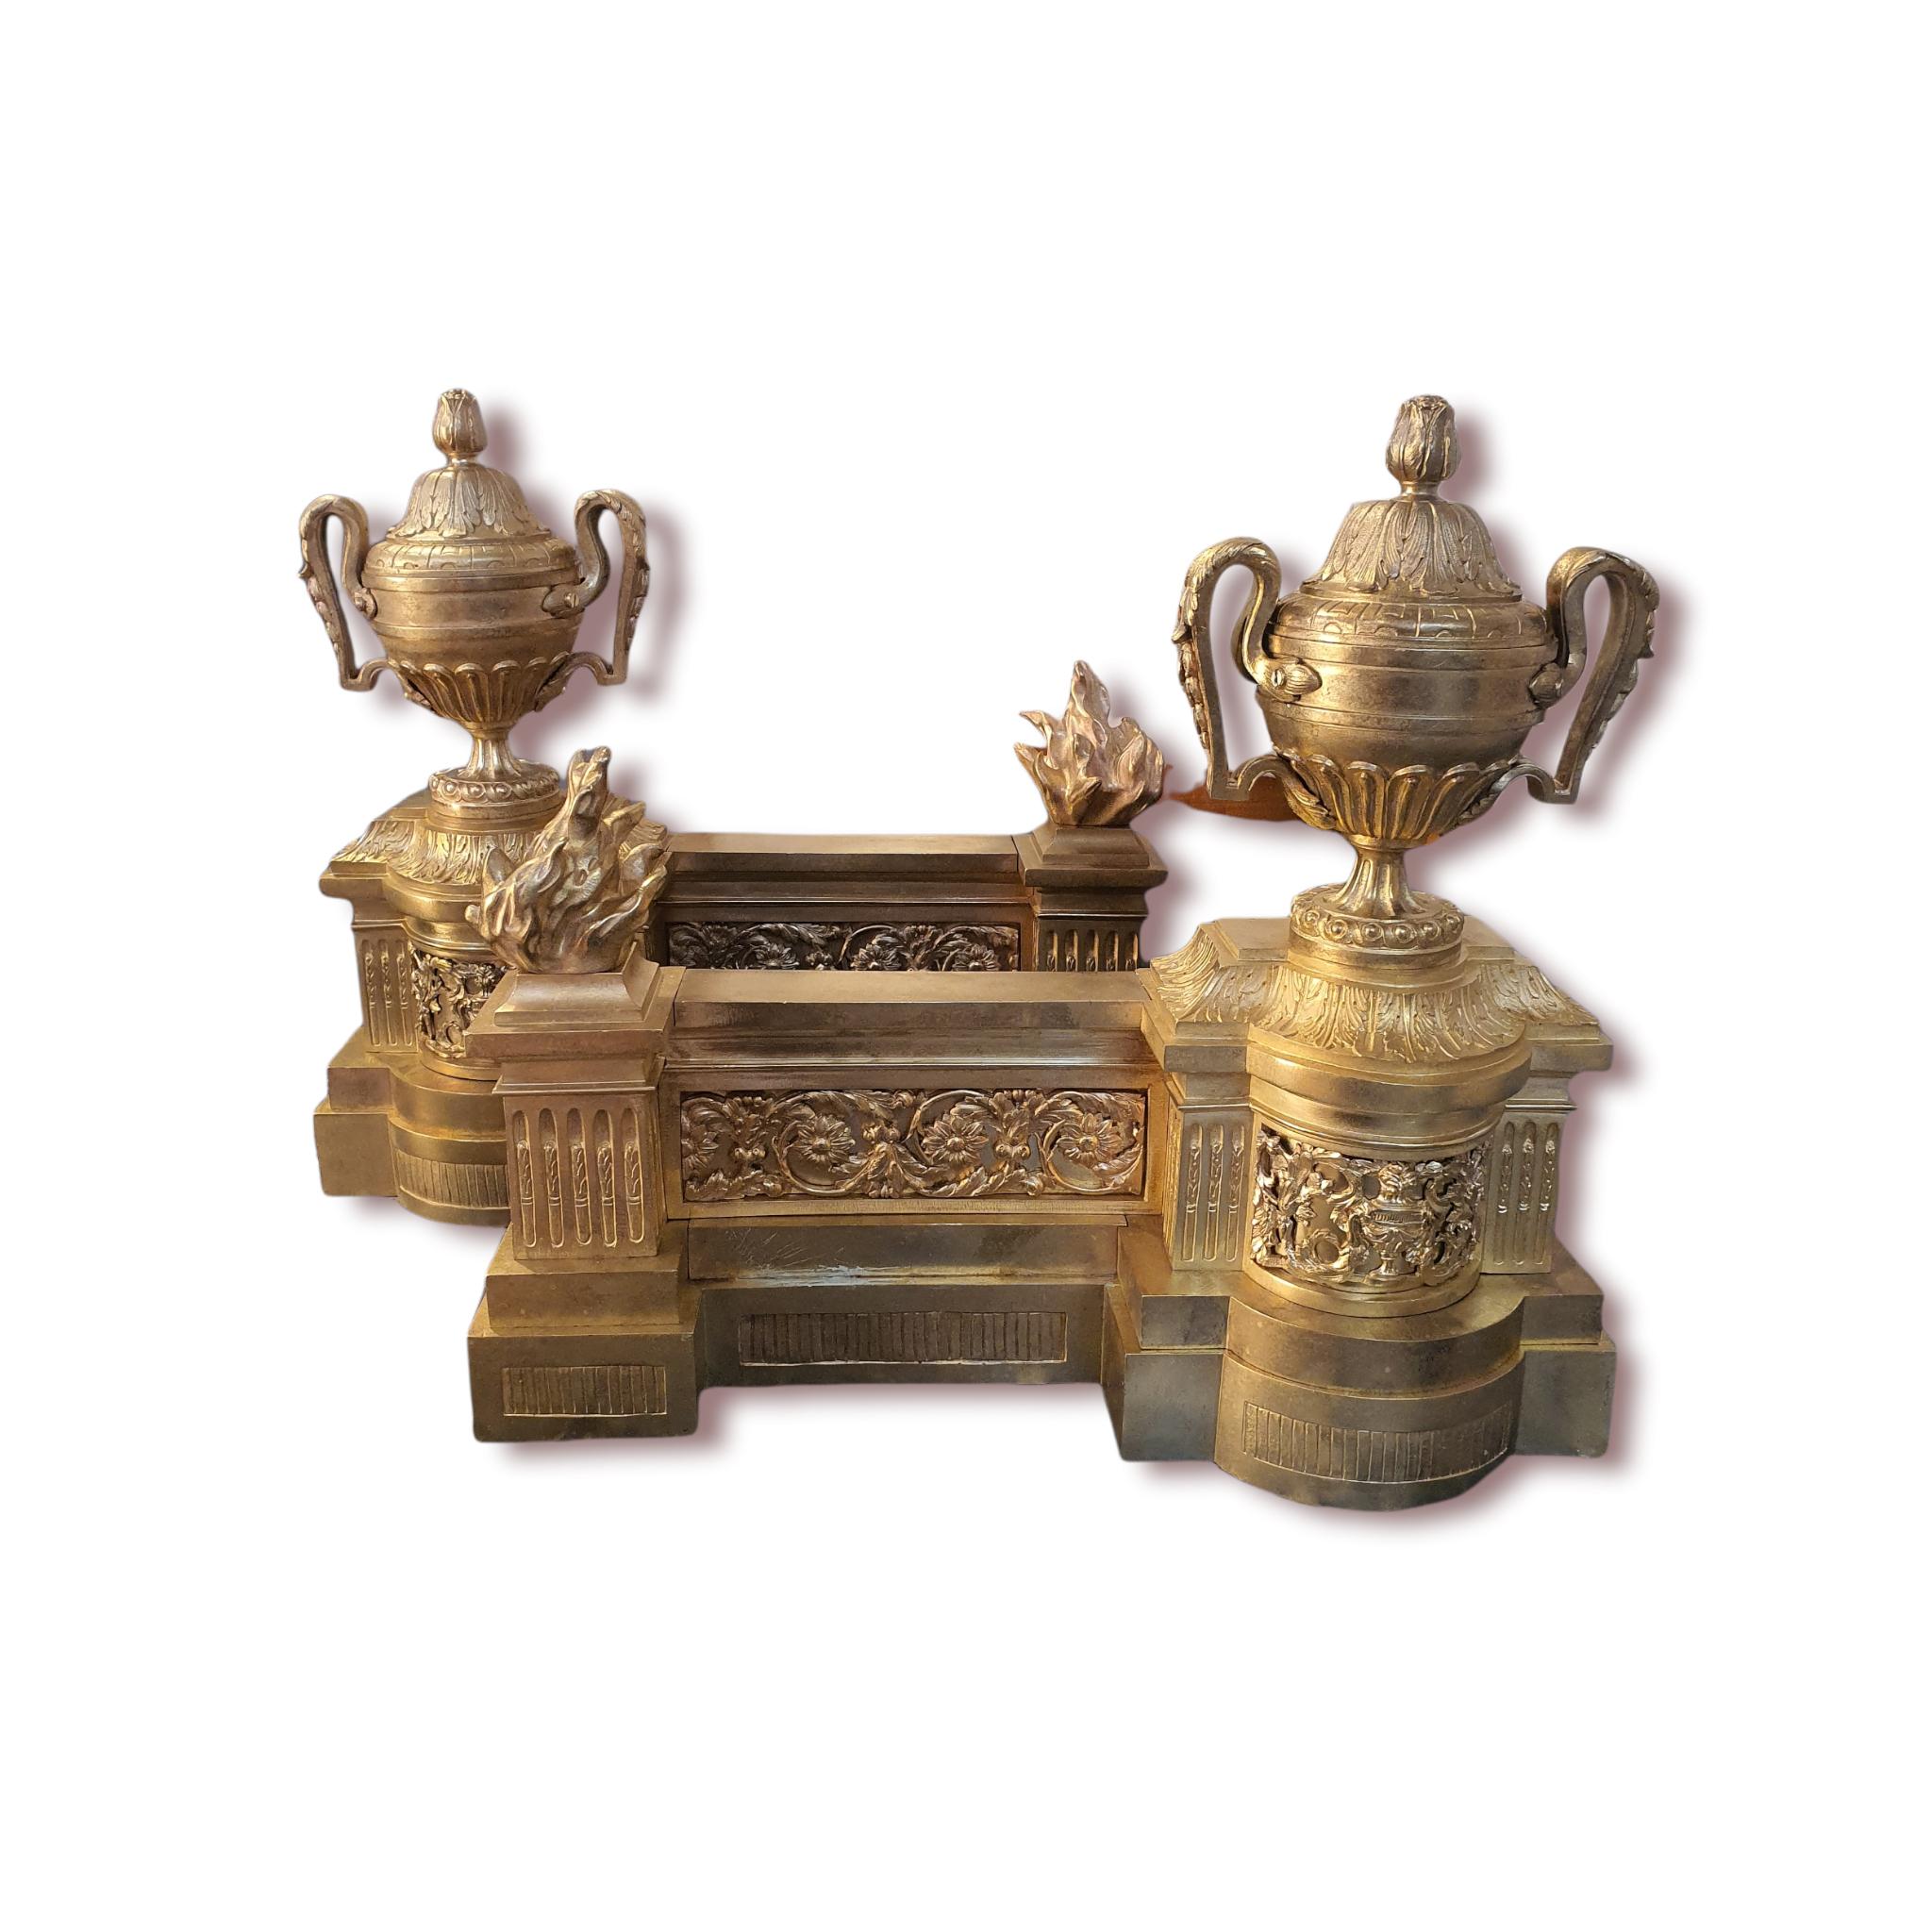 Elegant and rare pair of andirons, made of finely chiseled and gilded bronze.